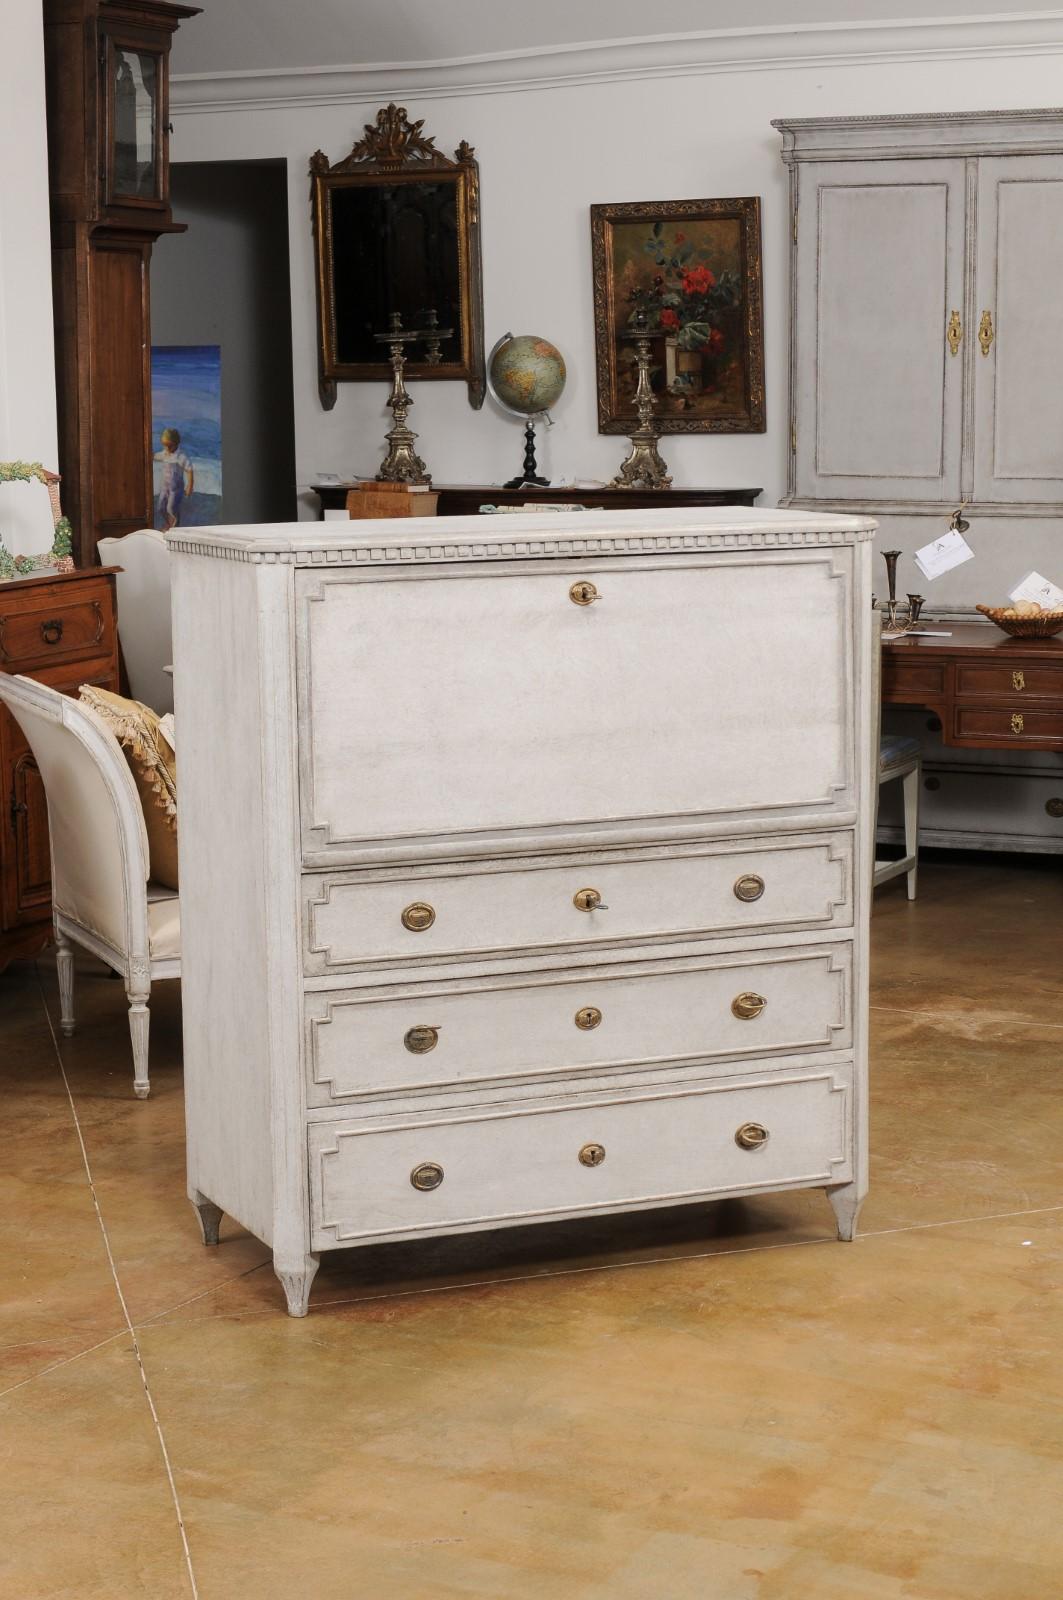 A Swedish Gustavian style painted wood drop-front secretary from the 19th century, with carved dentil molding, multiple inner drawers and three long graduated drawers. Created in Sweden during the 19th century, this painted secretary showcases the